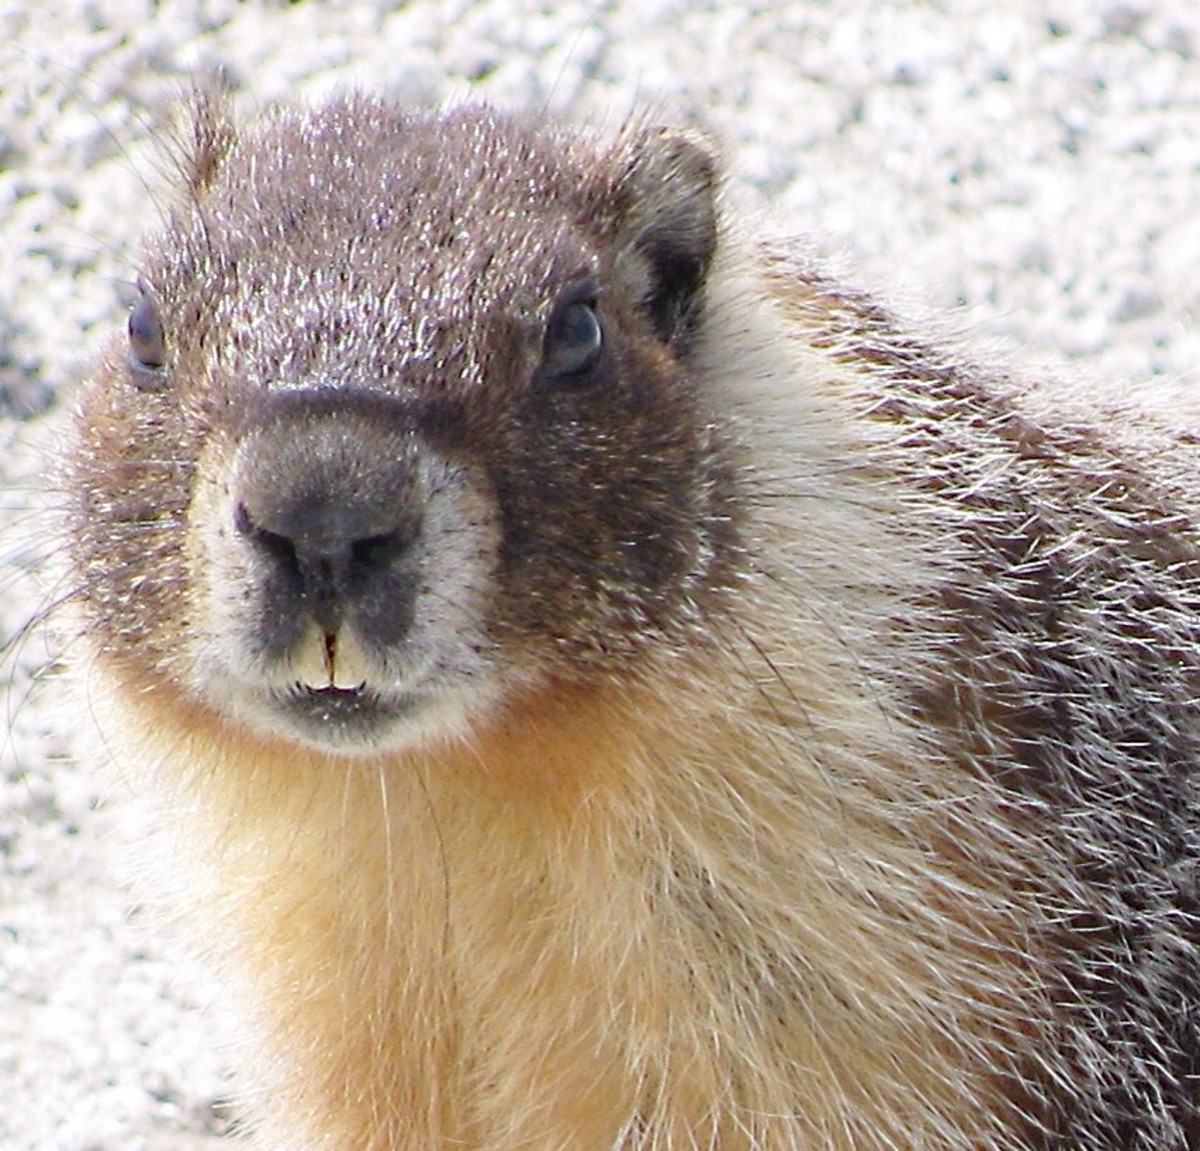 The Marmots of British Columbia: Interesting Facts and Photos - Owlcation